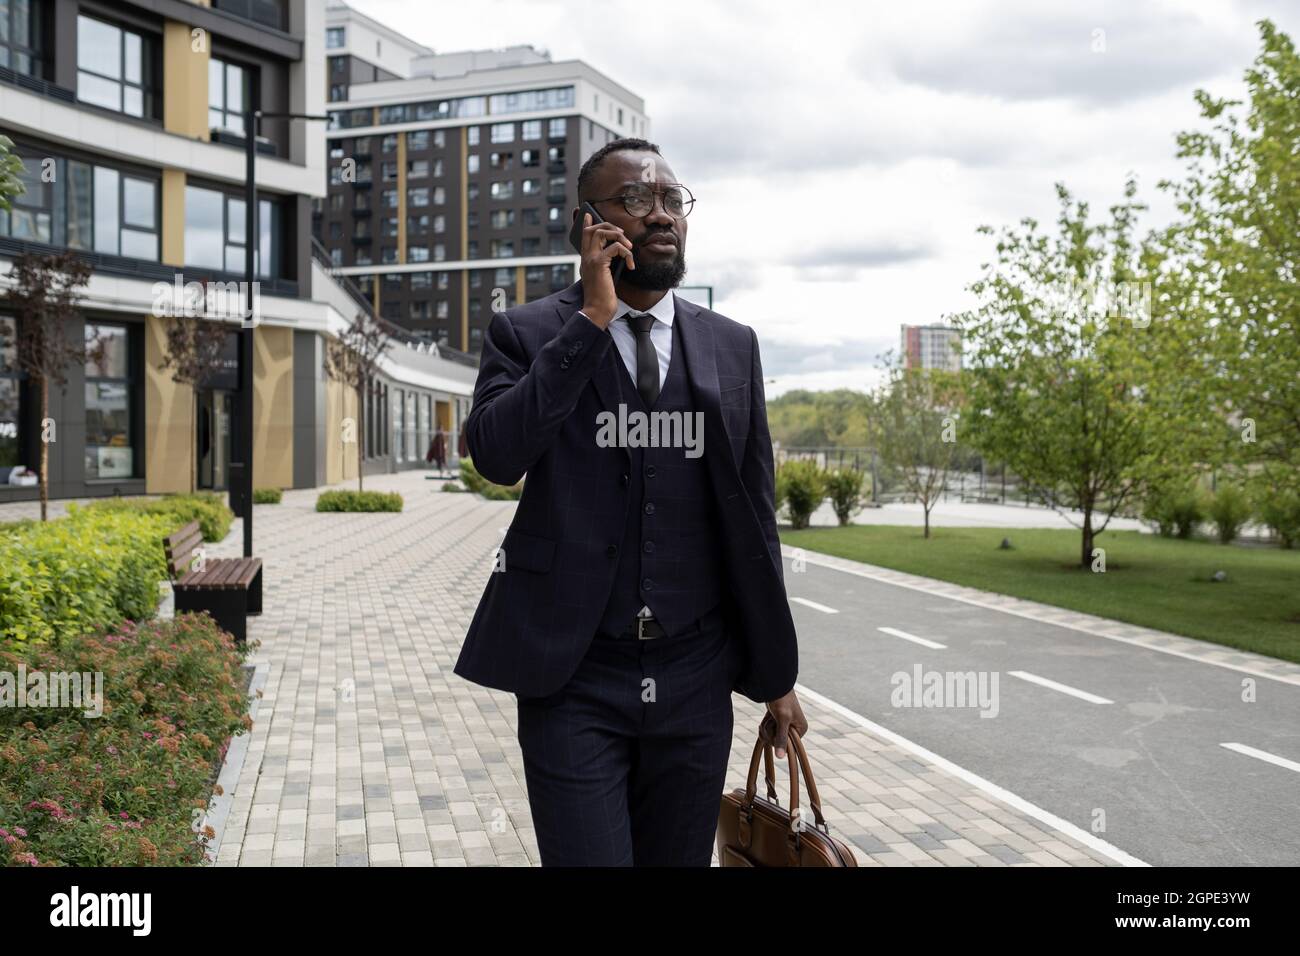 Busy banker of African ethnicity speaking on mobile phone in urban environment Stock Photo